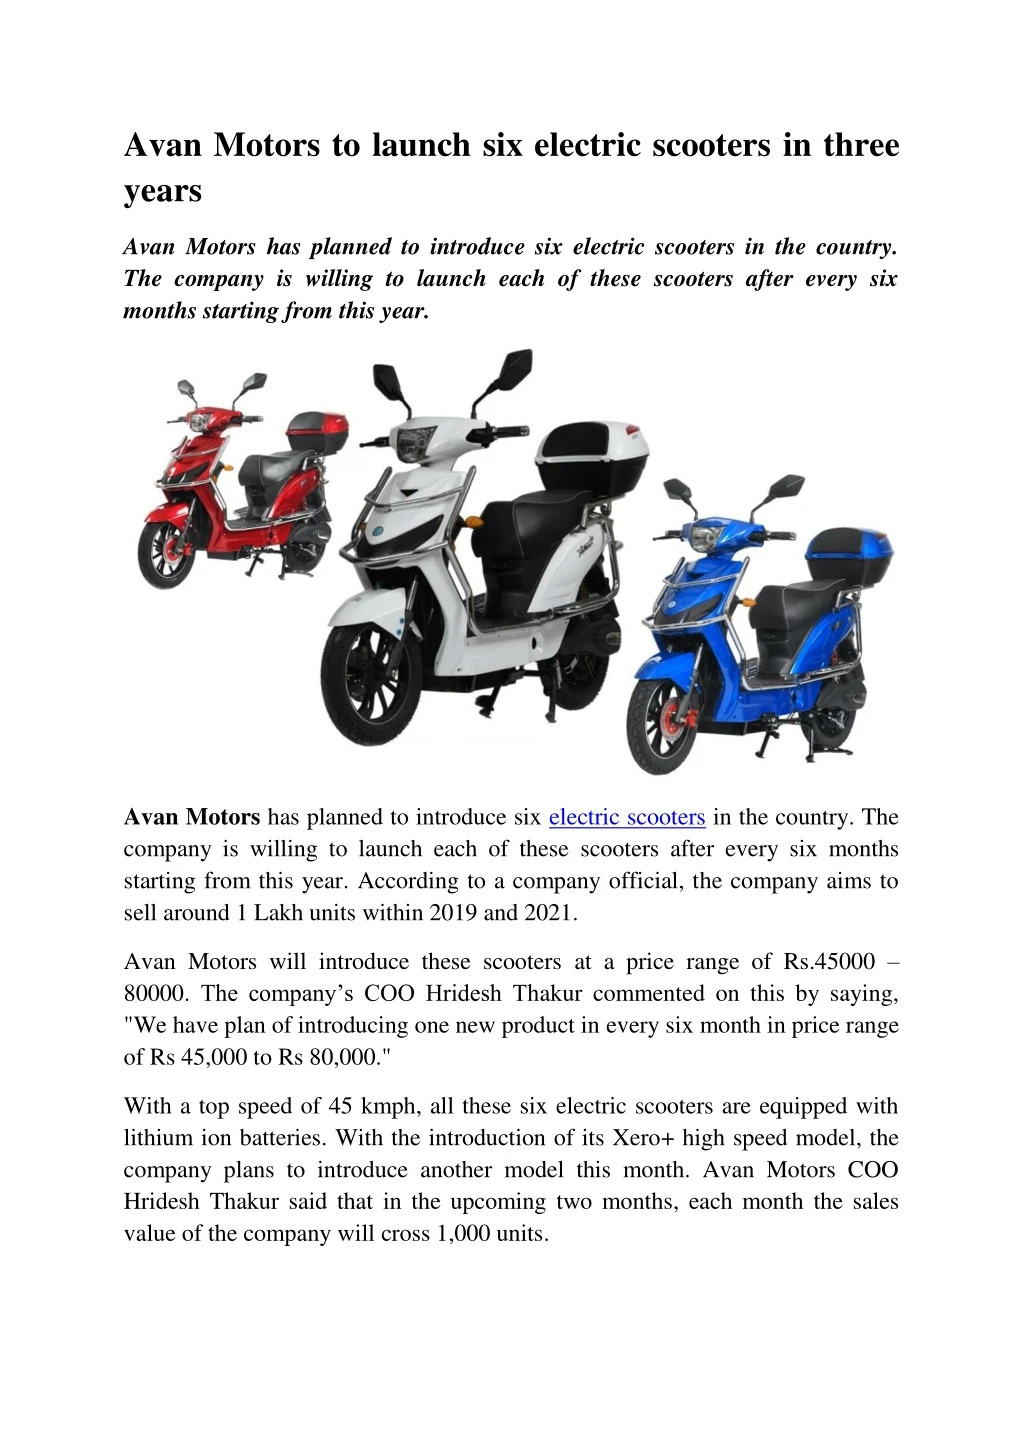 avan motors to launch six electric scooters